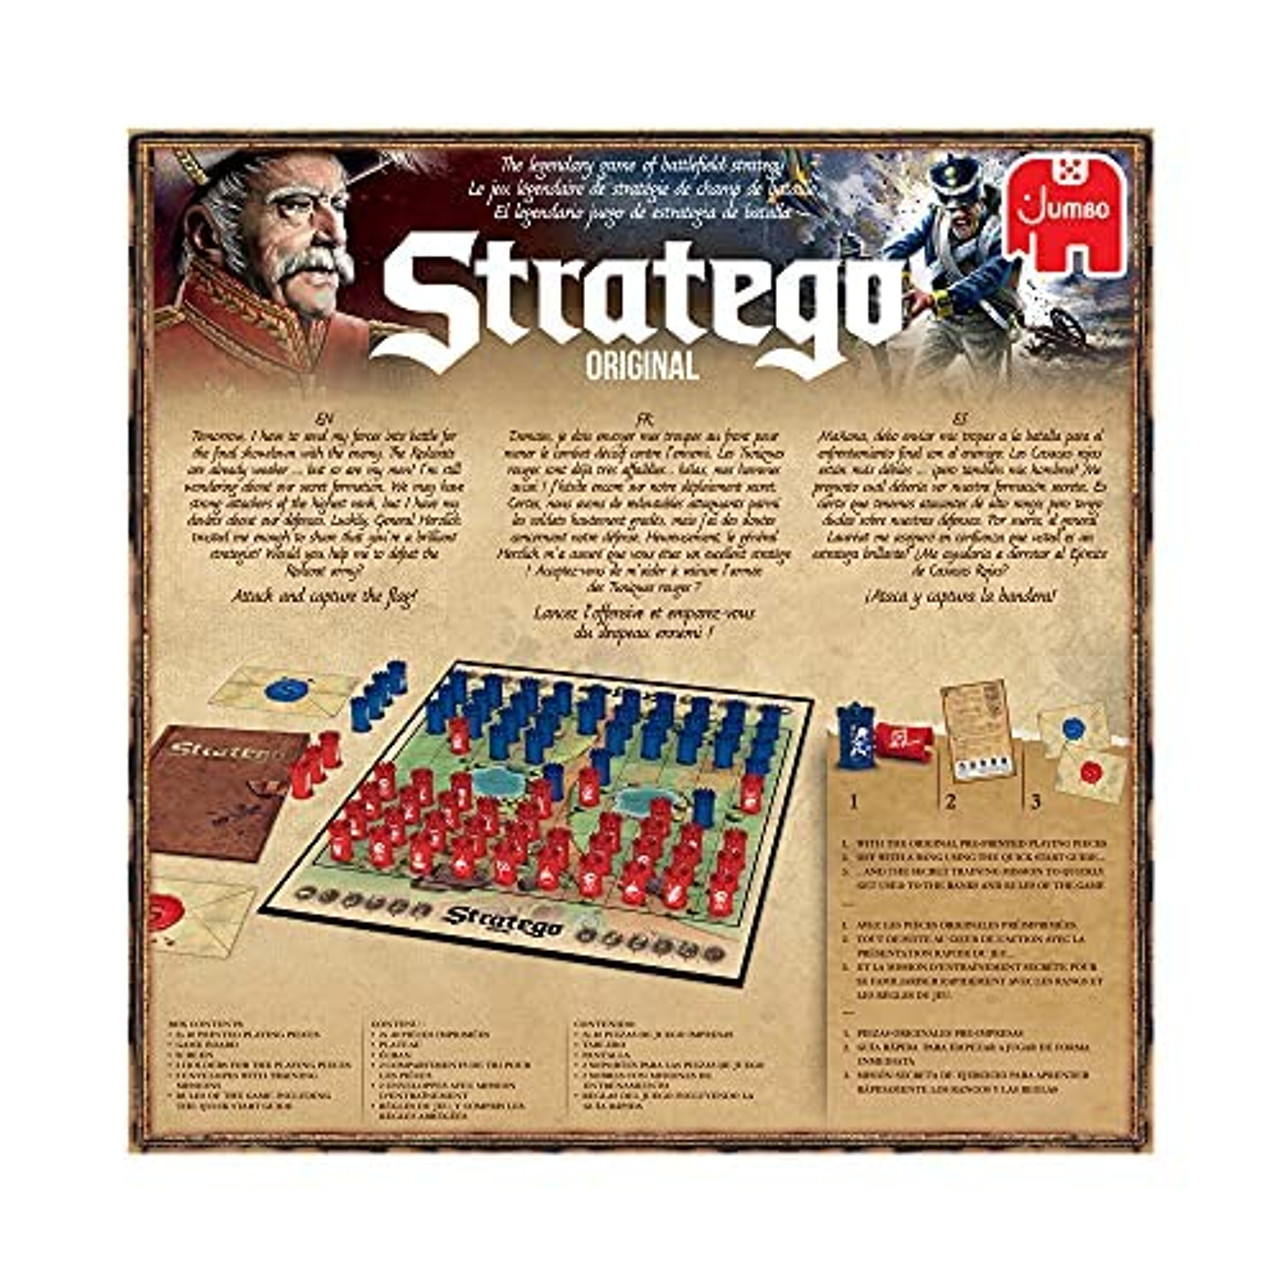 Jumbo, Stratego - Original, Strategy Board Game, 2 Players, Ages 8